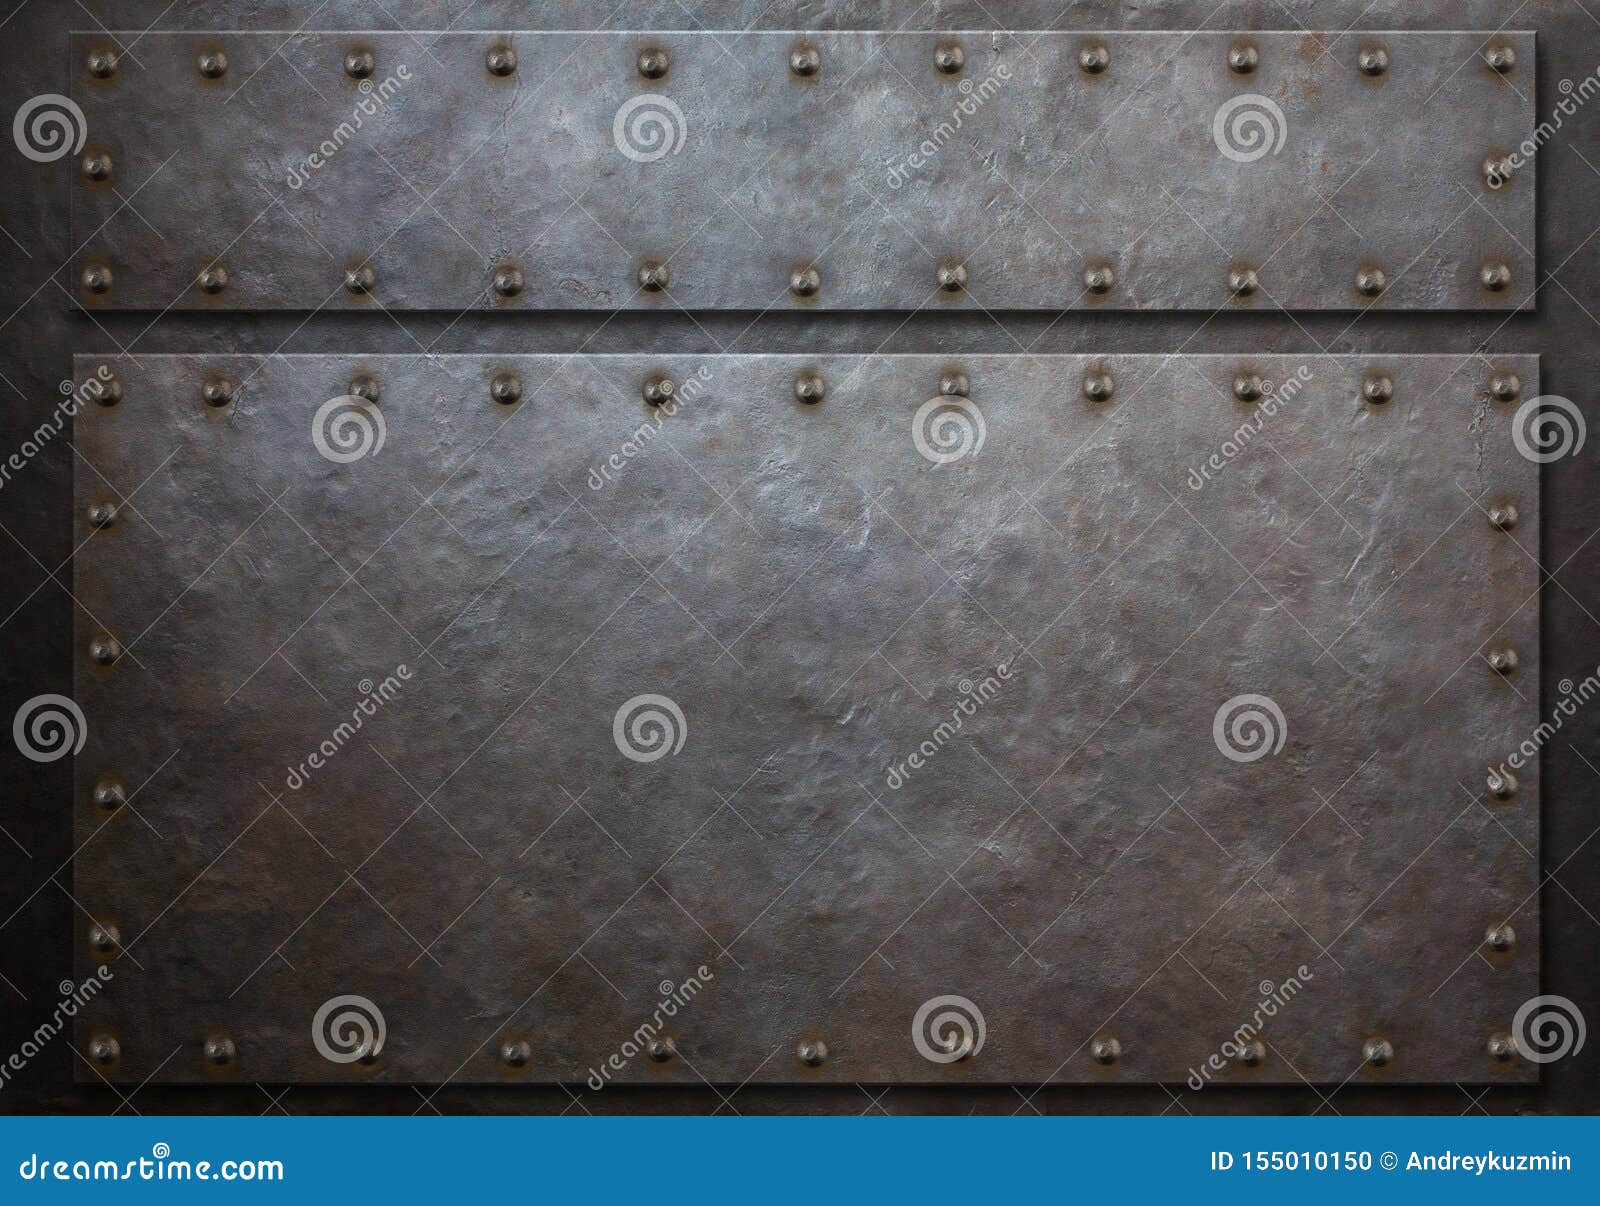 rustic forged plate with rivets metal background 3d 